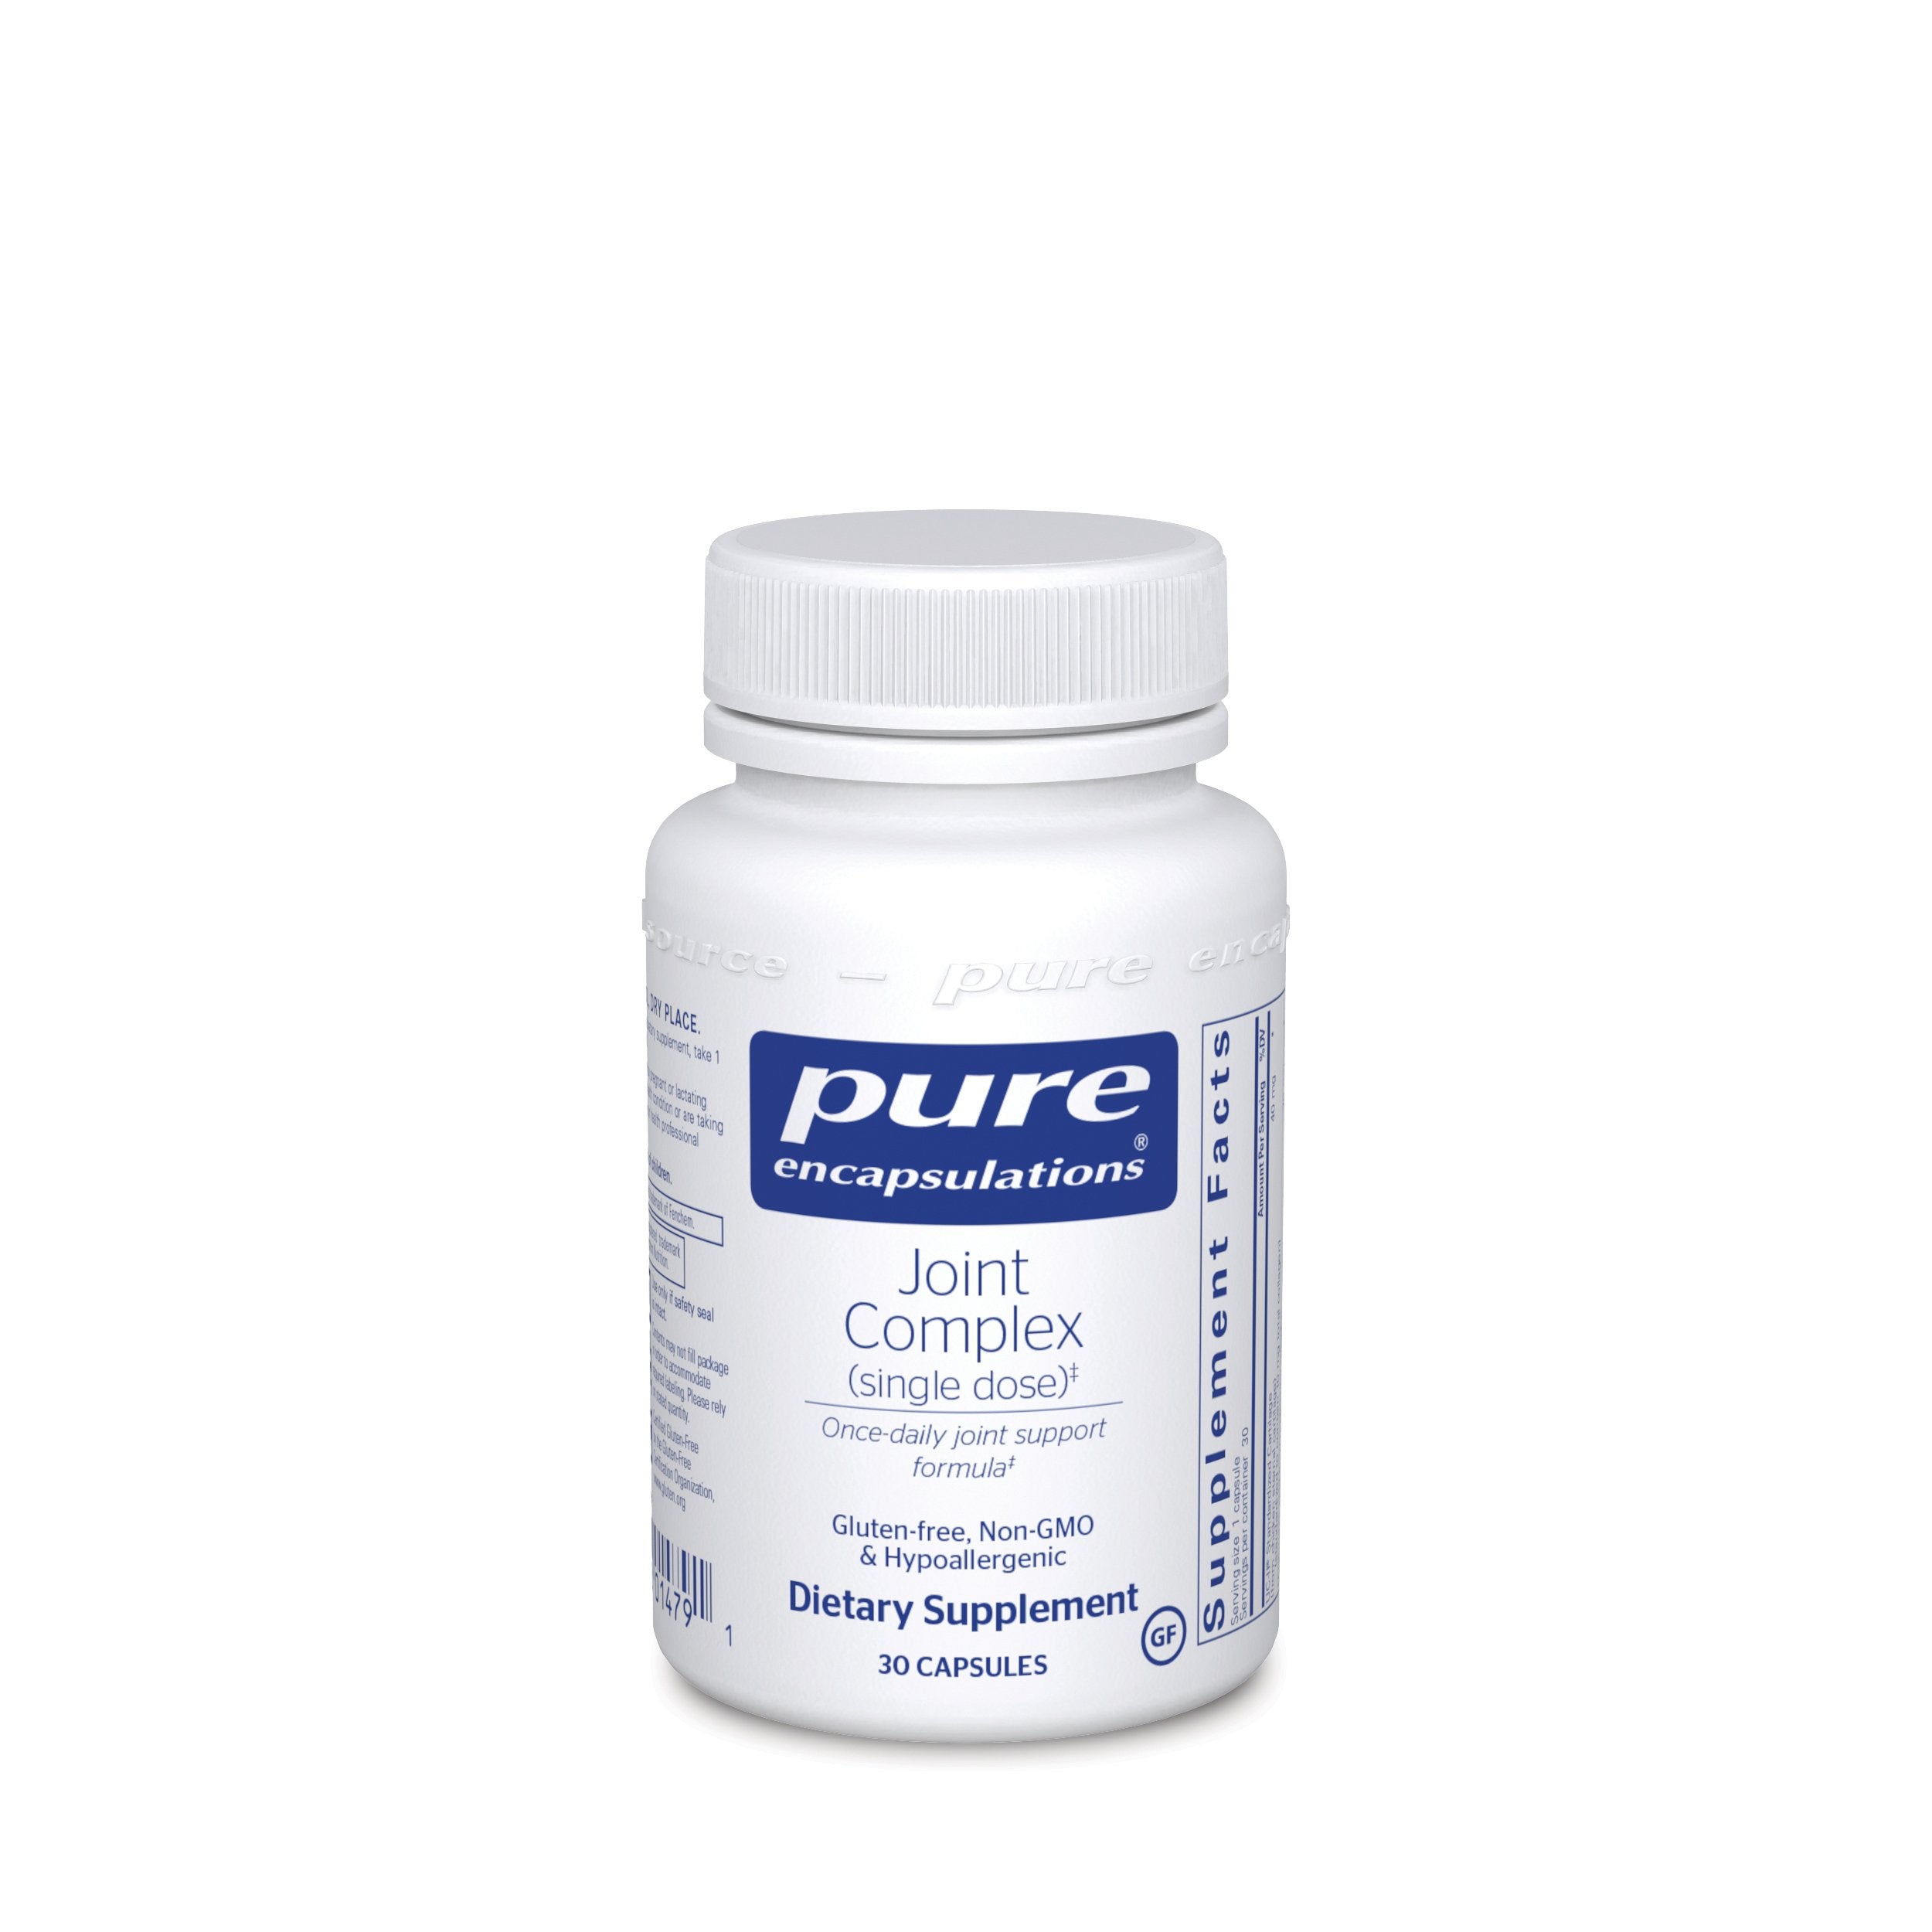 Pure Encapsulations Joint Complex (single dose) - 30/60 Capsules